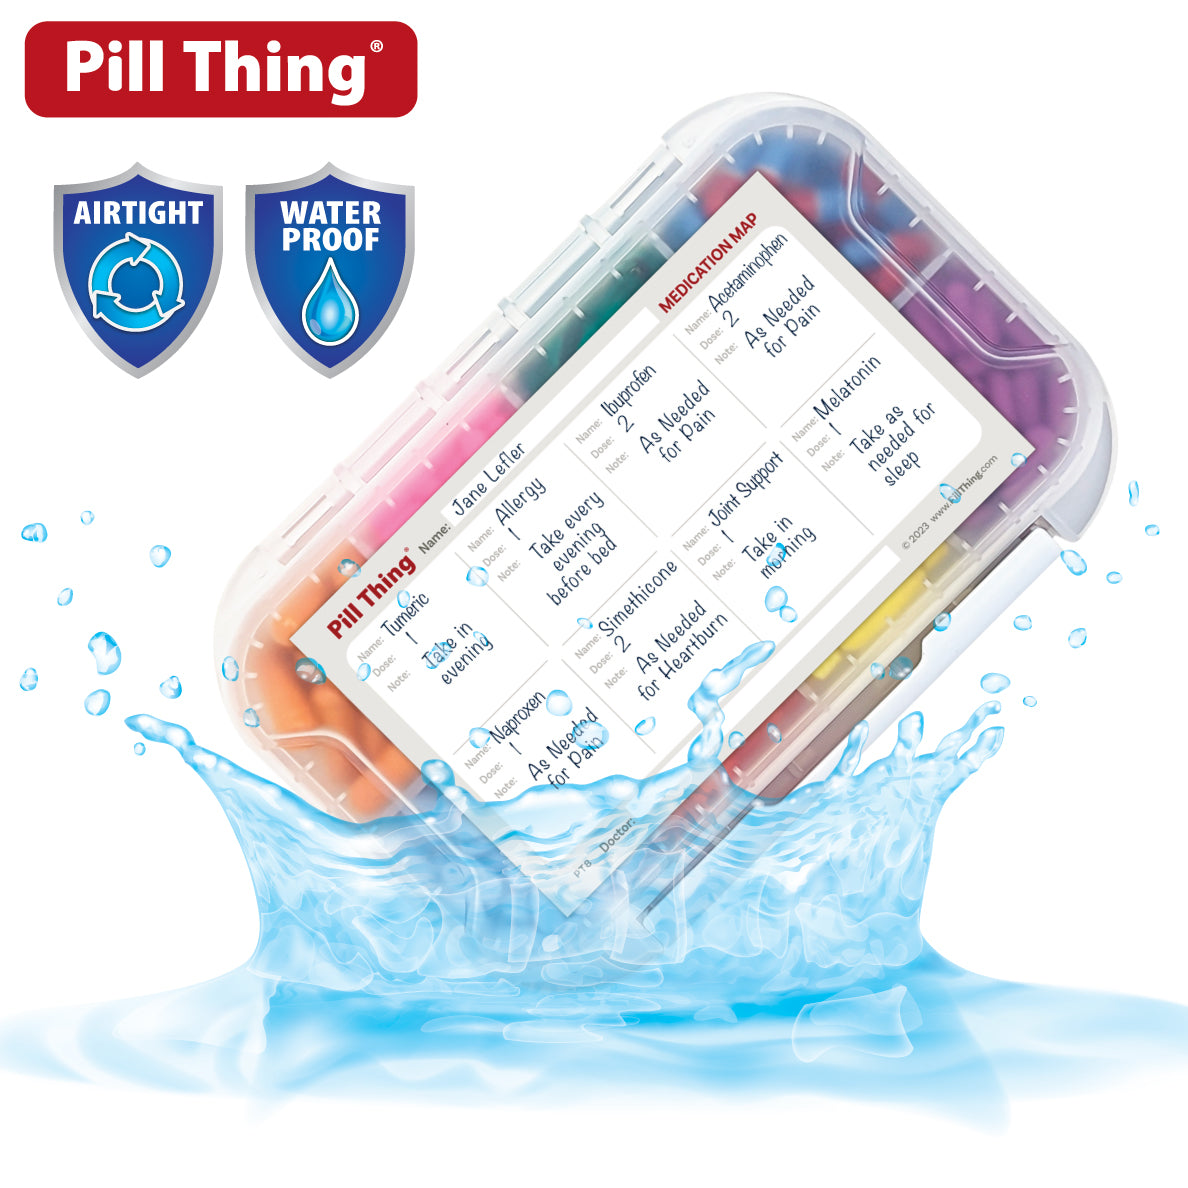 8 Compartment Large Pill Case with Airtight, Waterproof Seal